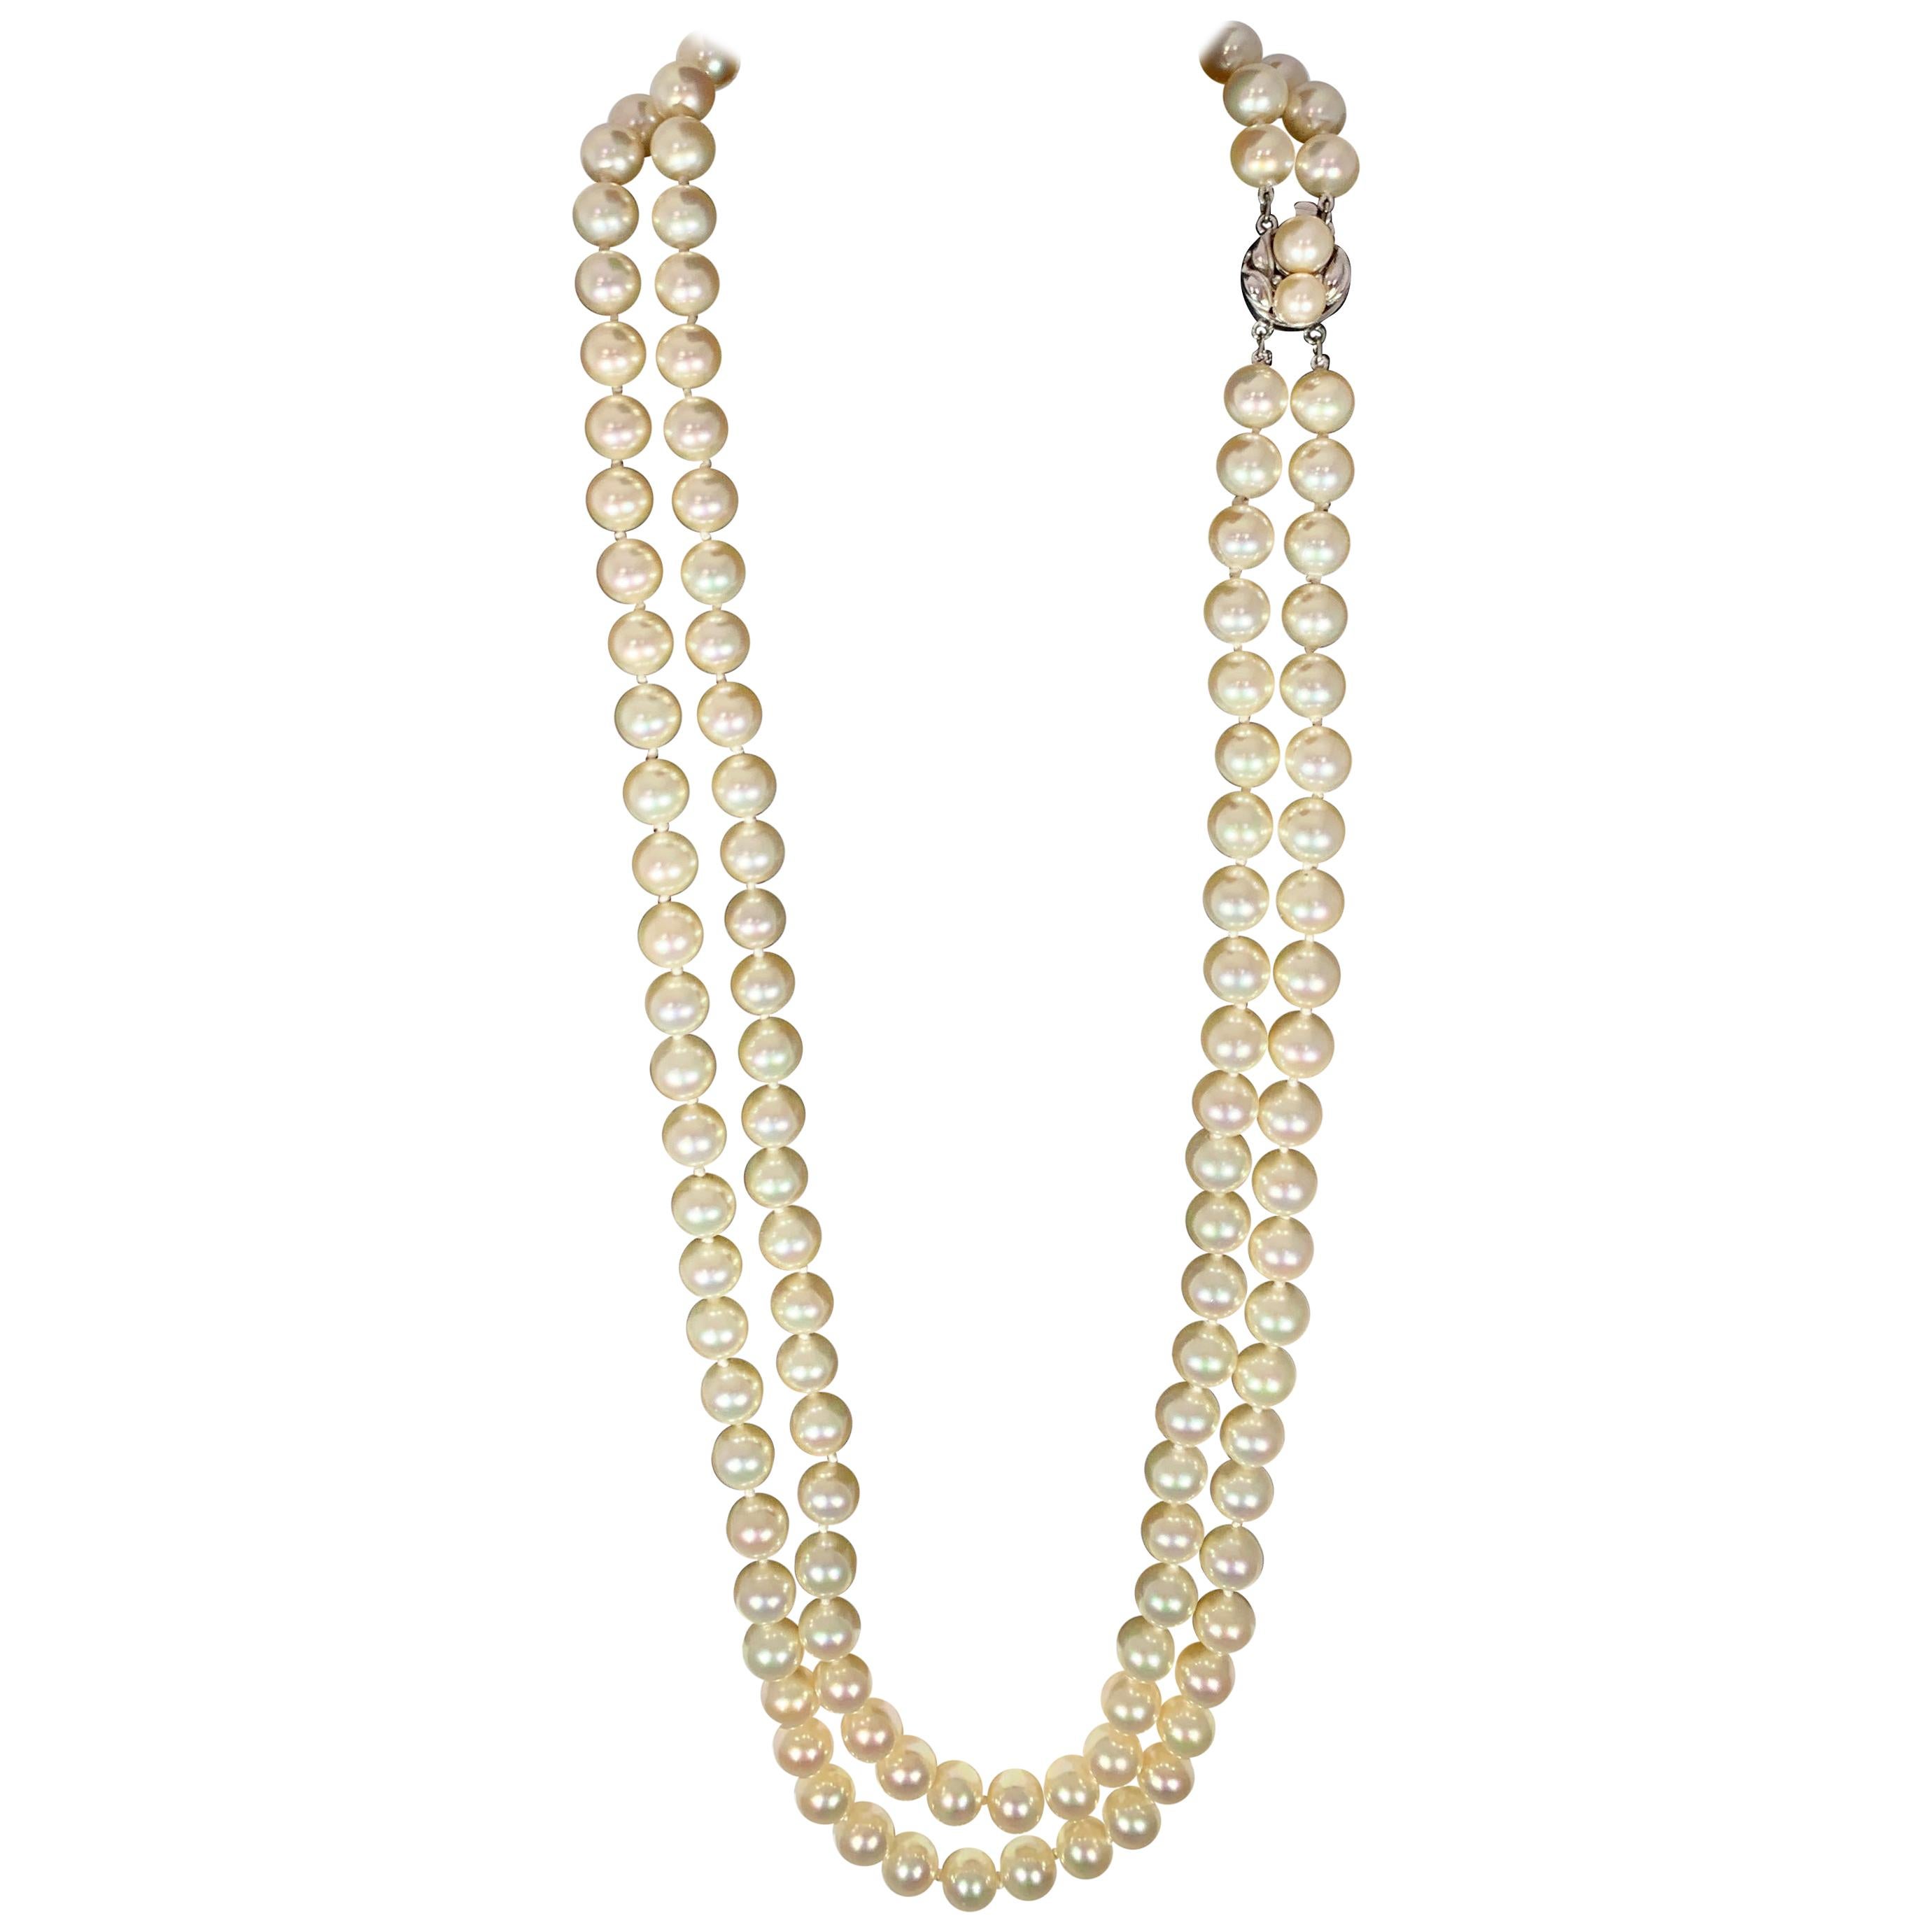 Vintage Pearl Double Strand Necklace with Pearl and Sterling Silver Clasp